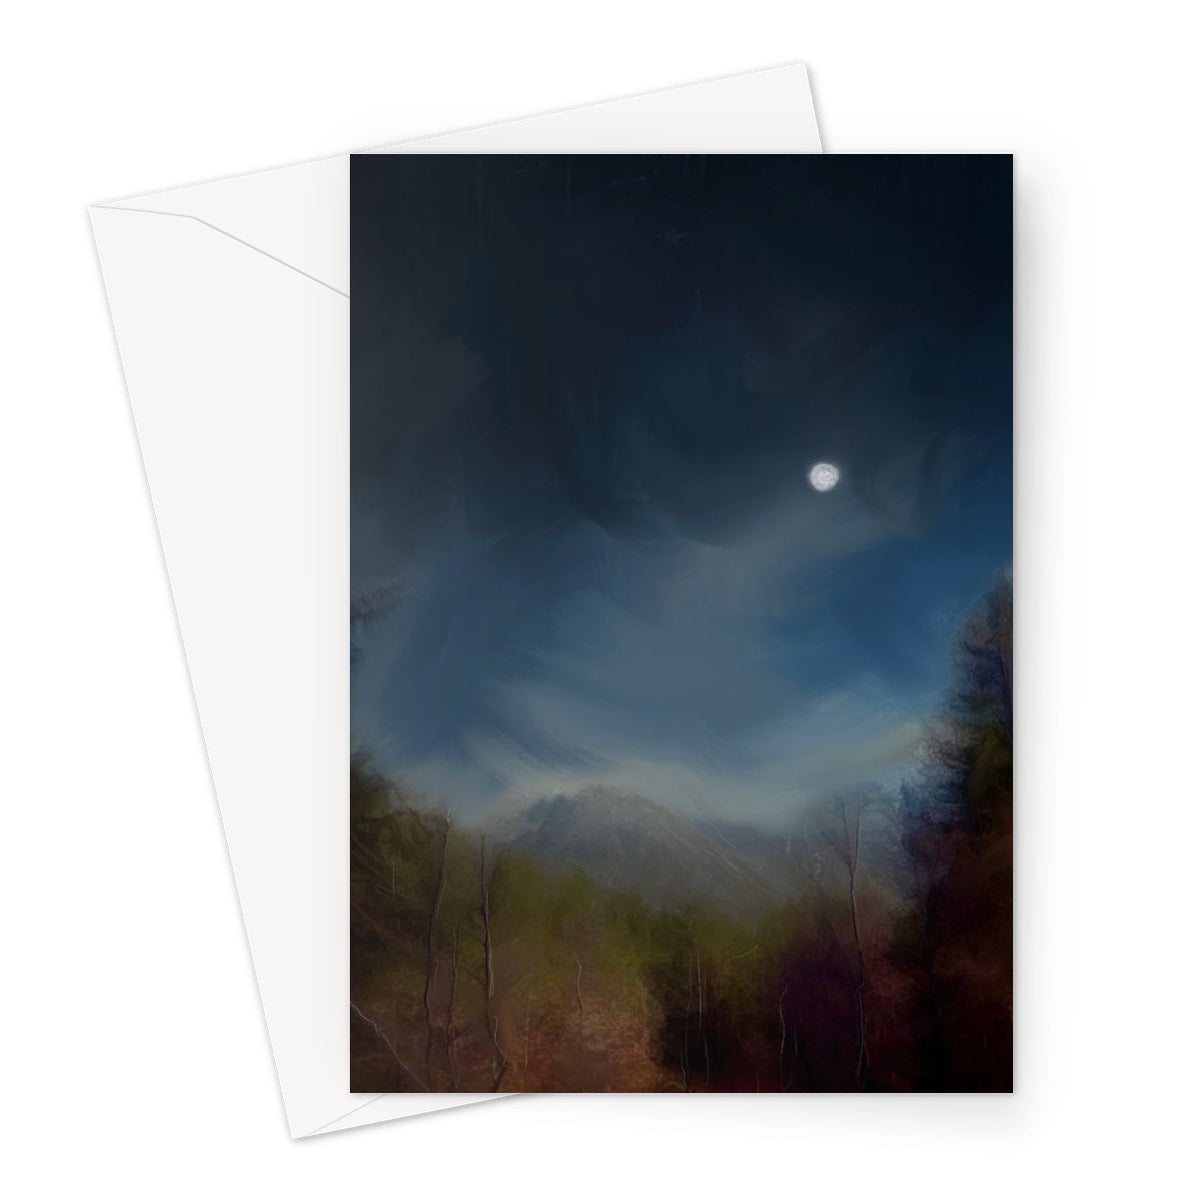 Glencoe Lochan Moonlight Art Gifts Greeting Card-Greetings Cards-Scottish Lochs & Mountains Art Gallery-A5 Portrait-10 Cards-Paintings, Prints, Homeware, Art Gifts From Scotland By Scottish Artist Kevin Hunter